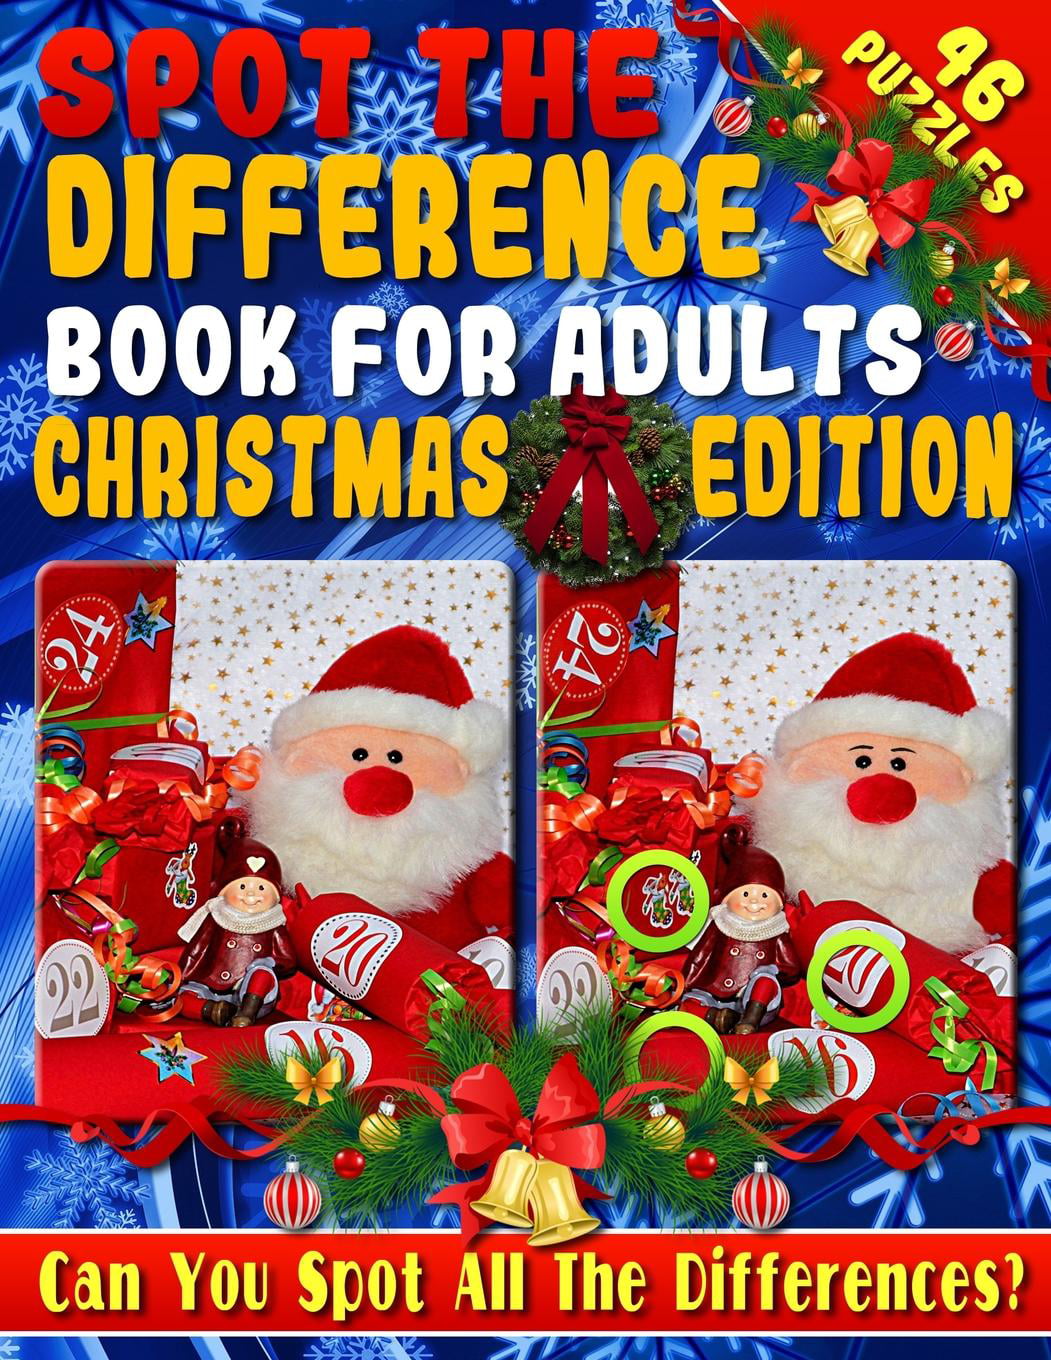 Spot the Difference Book for Adults : Christmas Edition - Fun Christmas Picture Puzzles - Can ...